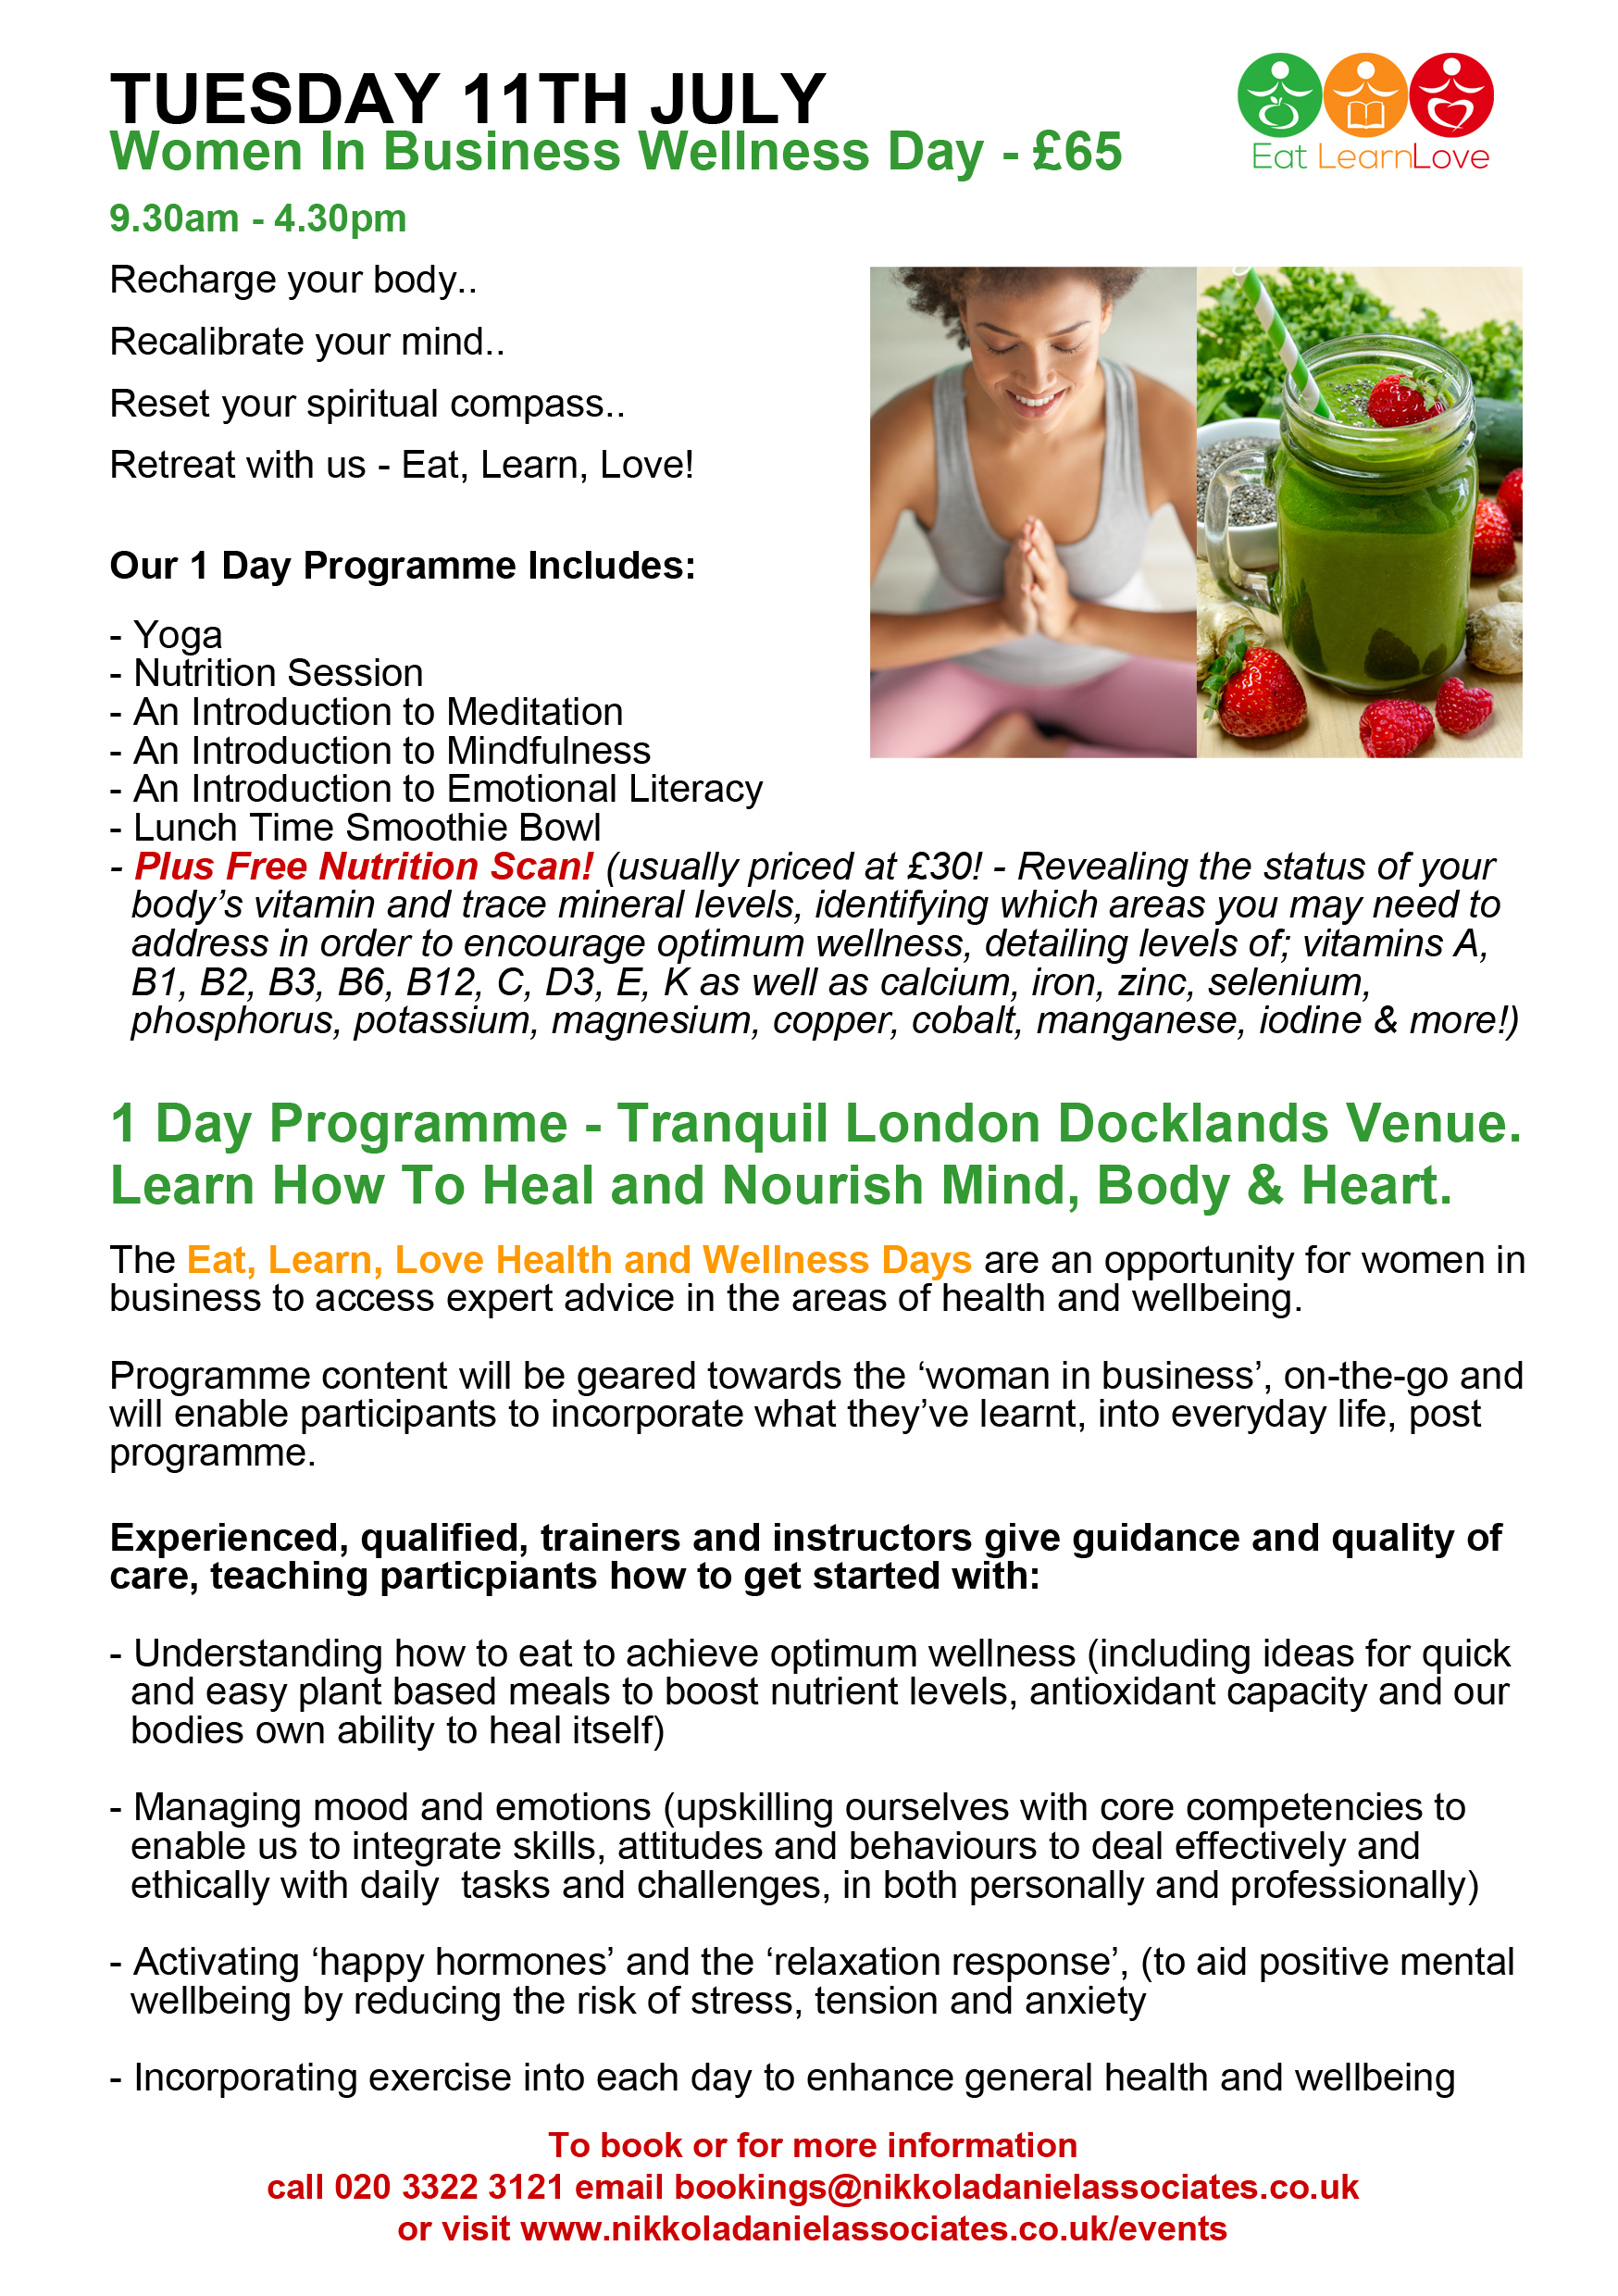 WIB WELLNESS DAY LEAFLET BACX 11TH JULY